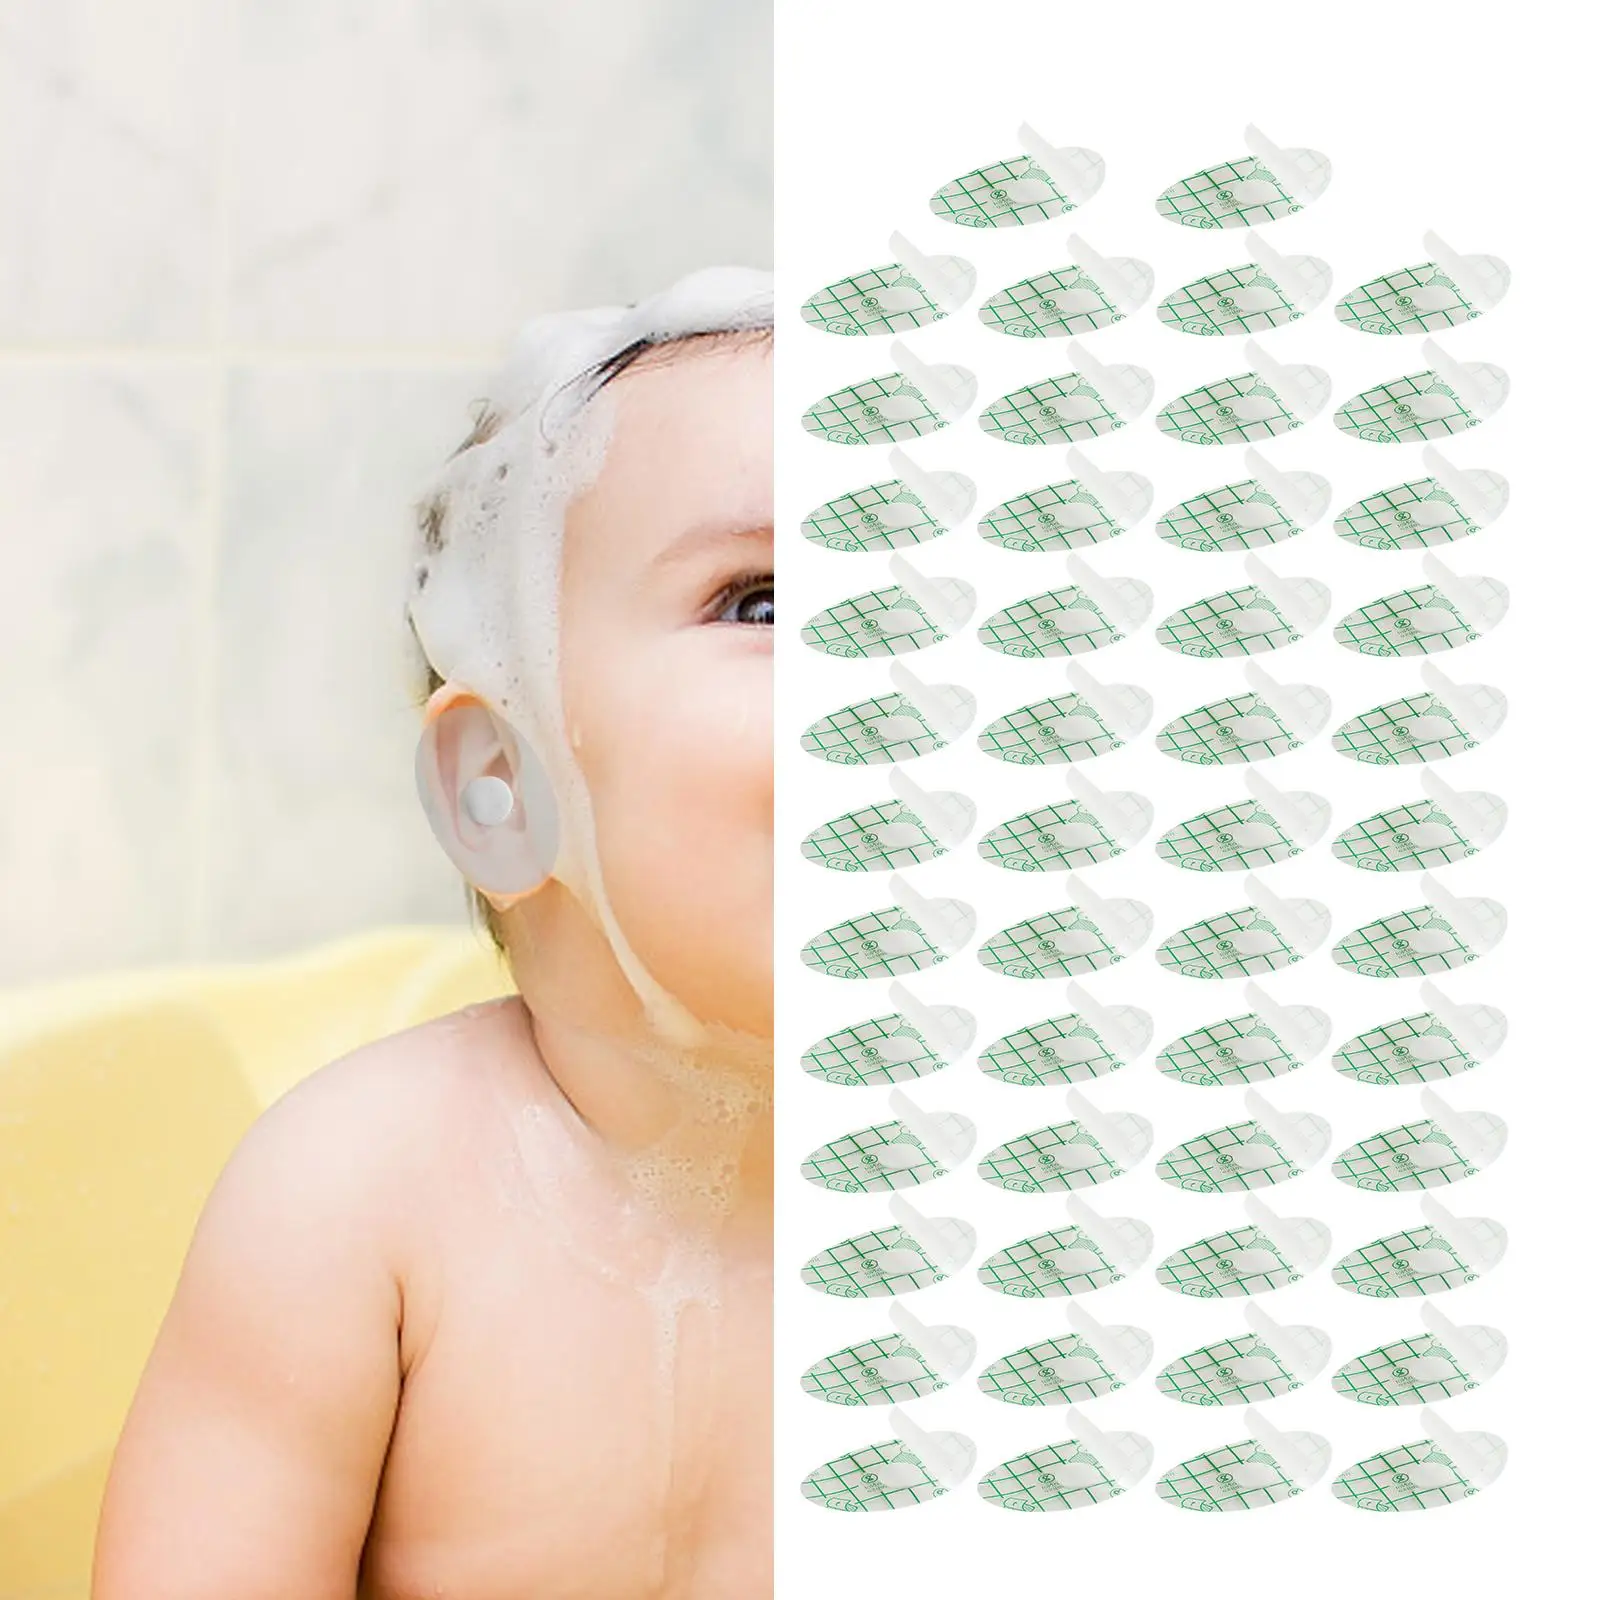 50x Waterproof Baby Ear Stickers Transparent Adhesive Ears Protector Covers for Swimming Hairdressing Showering Surfing Infants